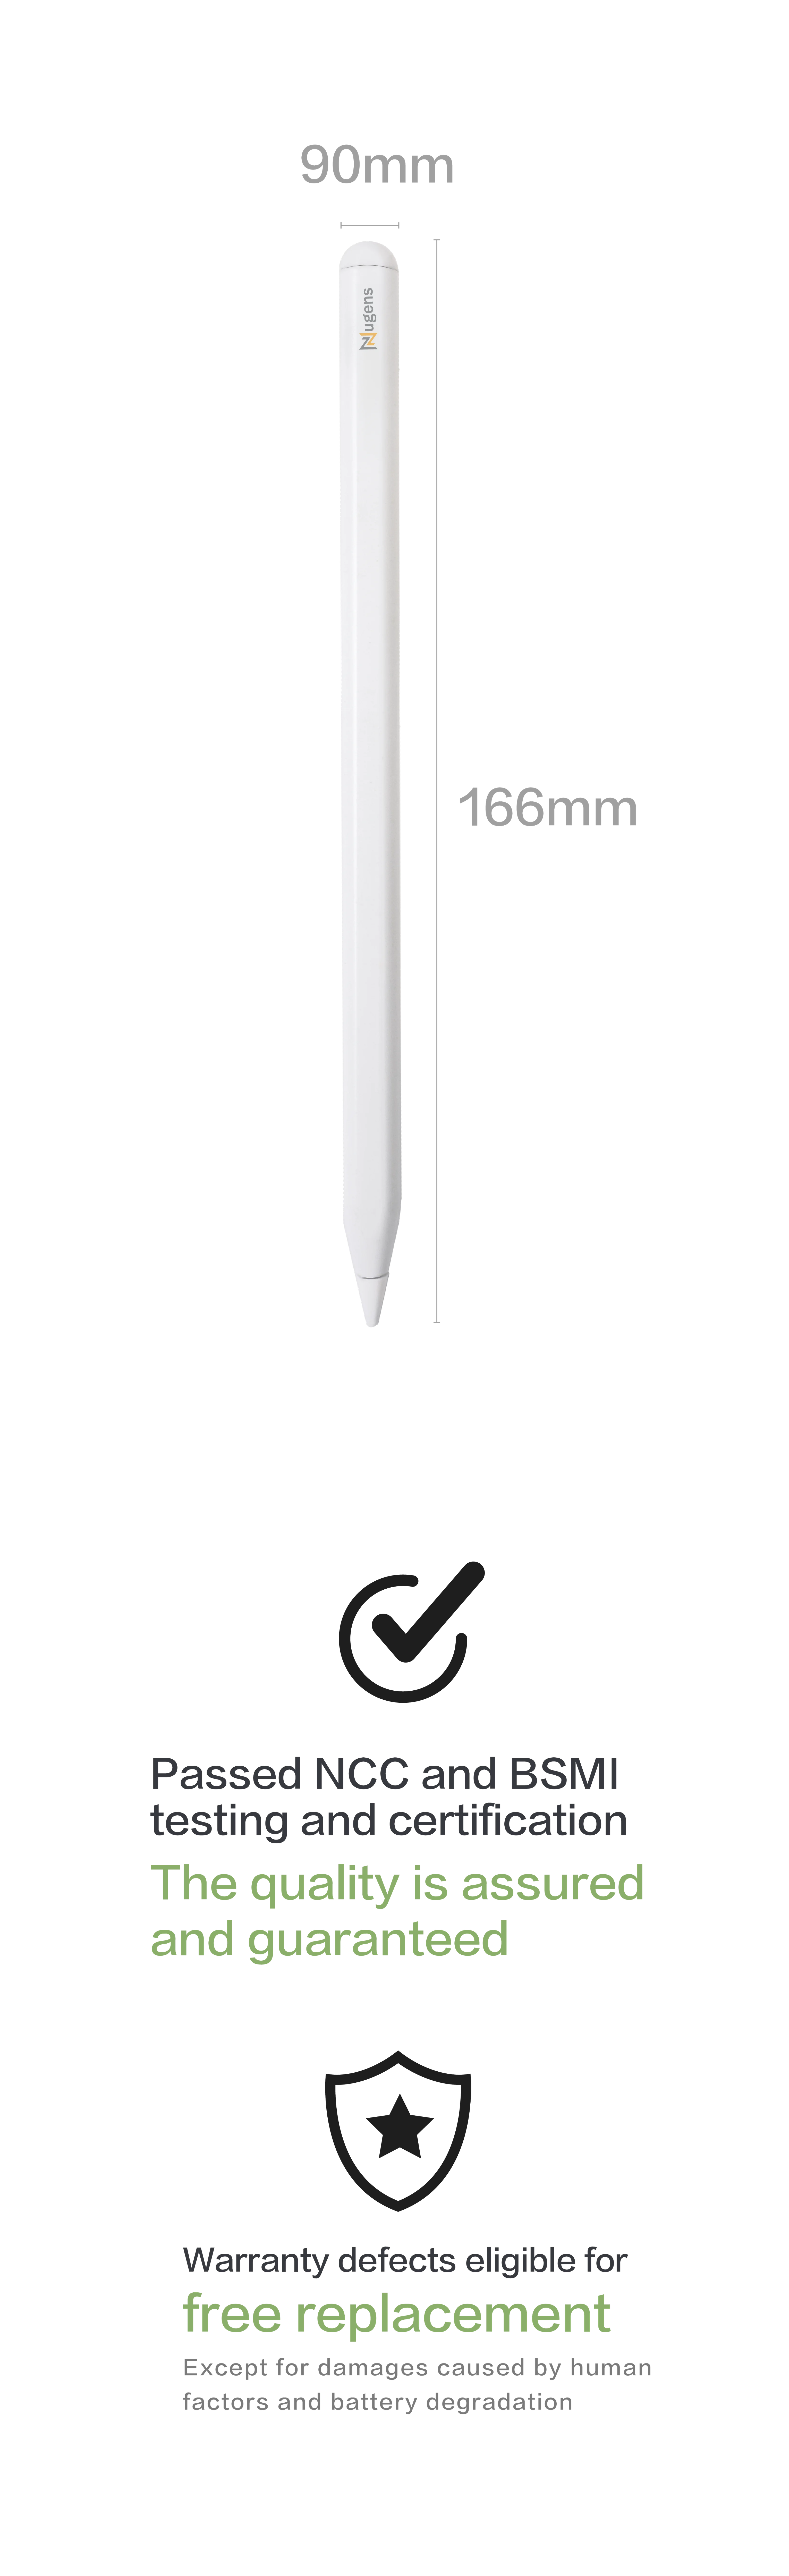 Bluetooth magnetic stylus size and certification